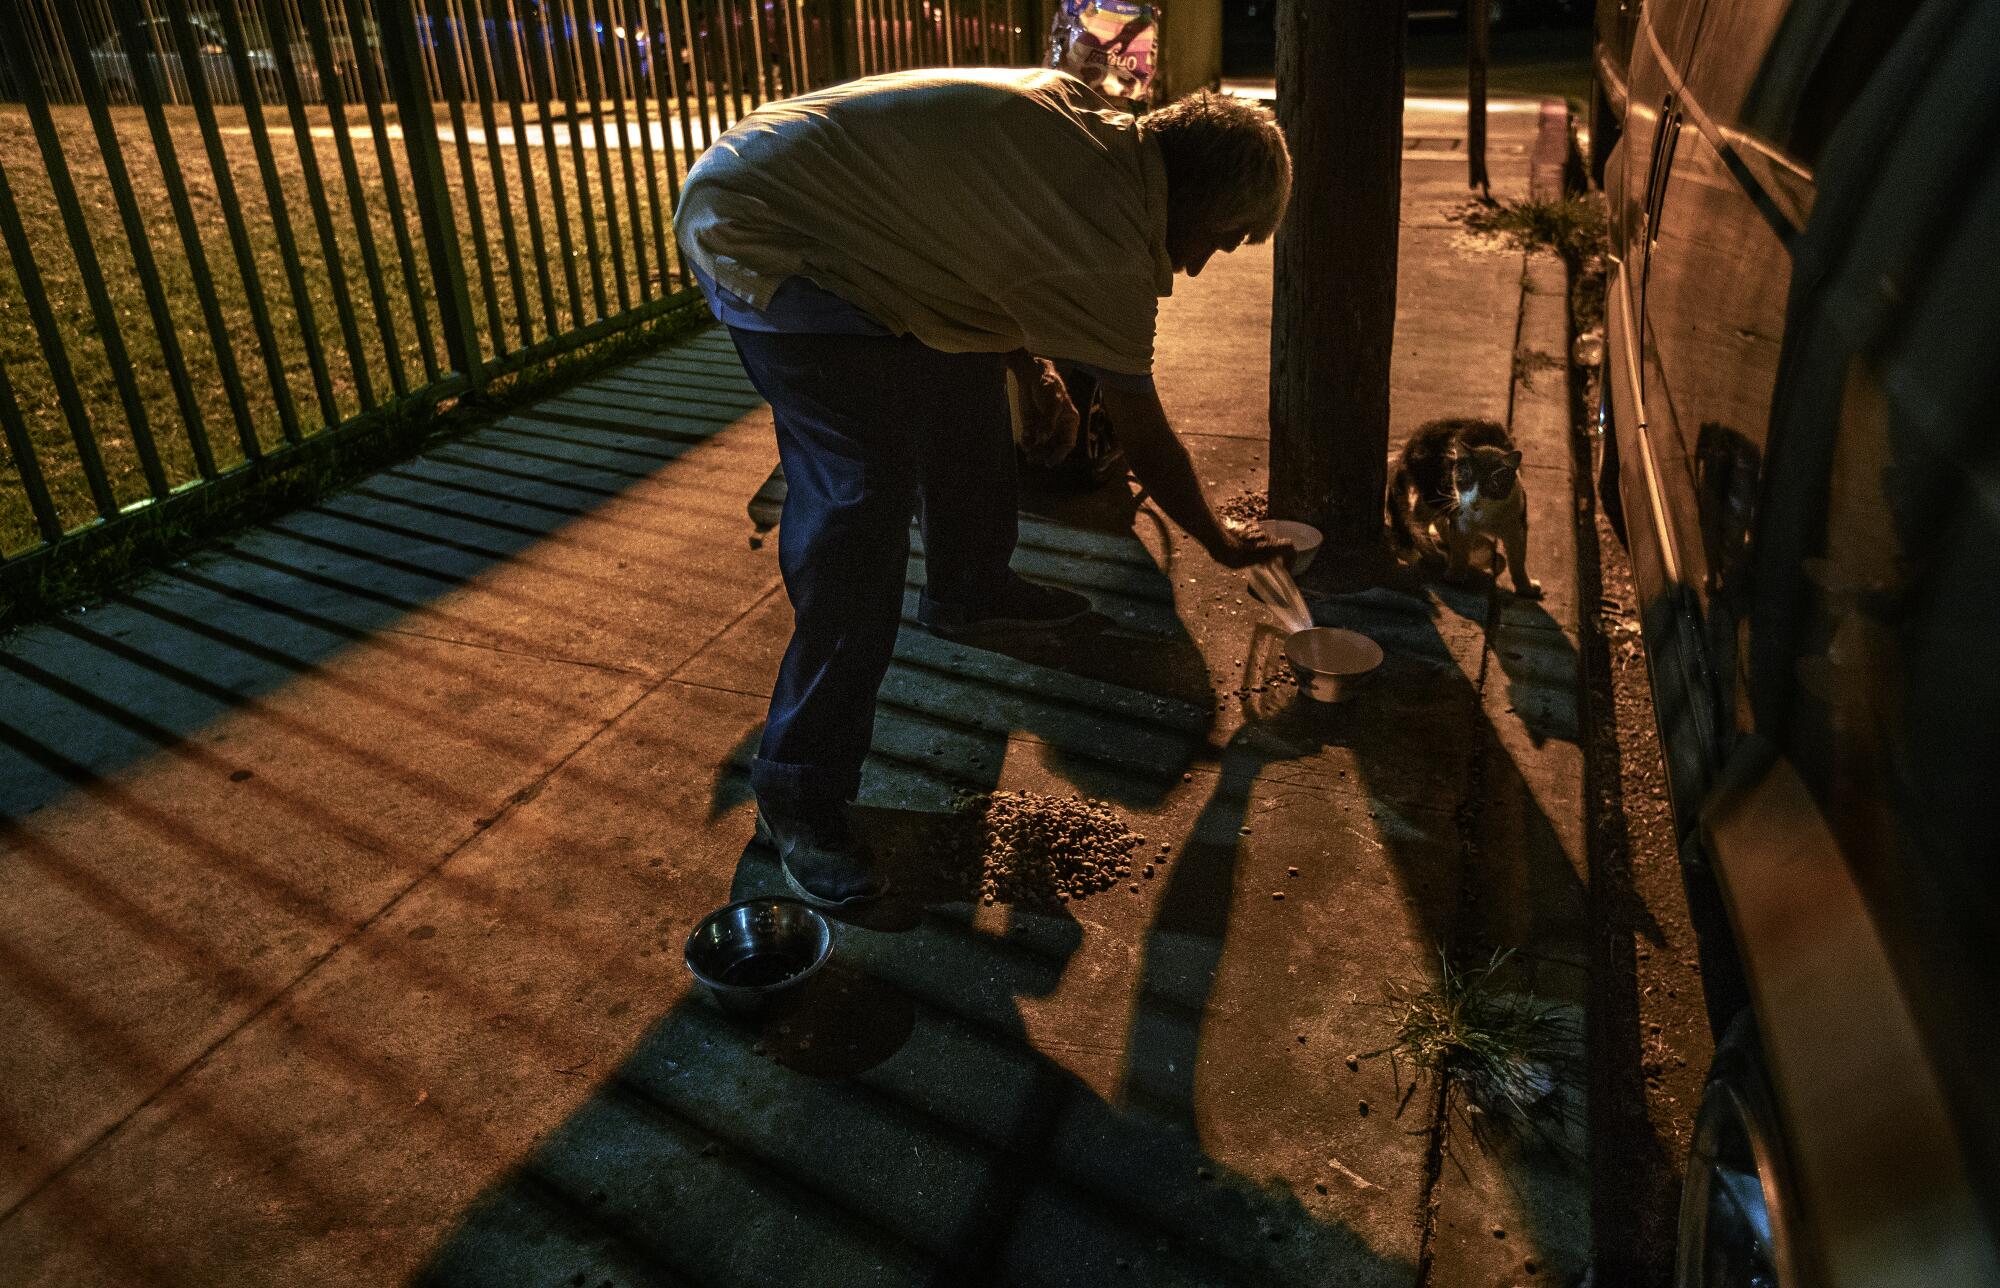 Augustine Hurtado puts out dry cat food for strays on Wall Street in South Los Angeles.